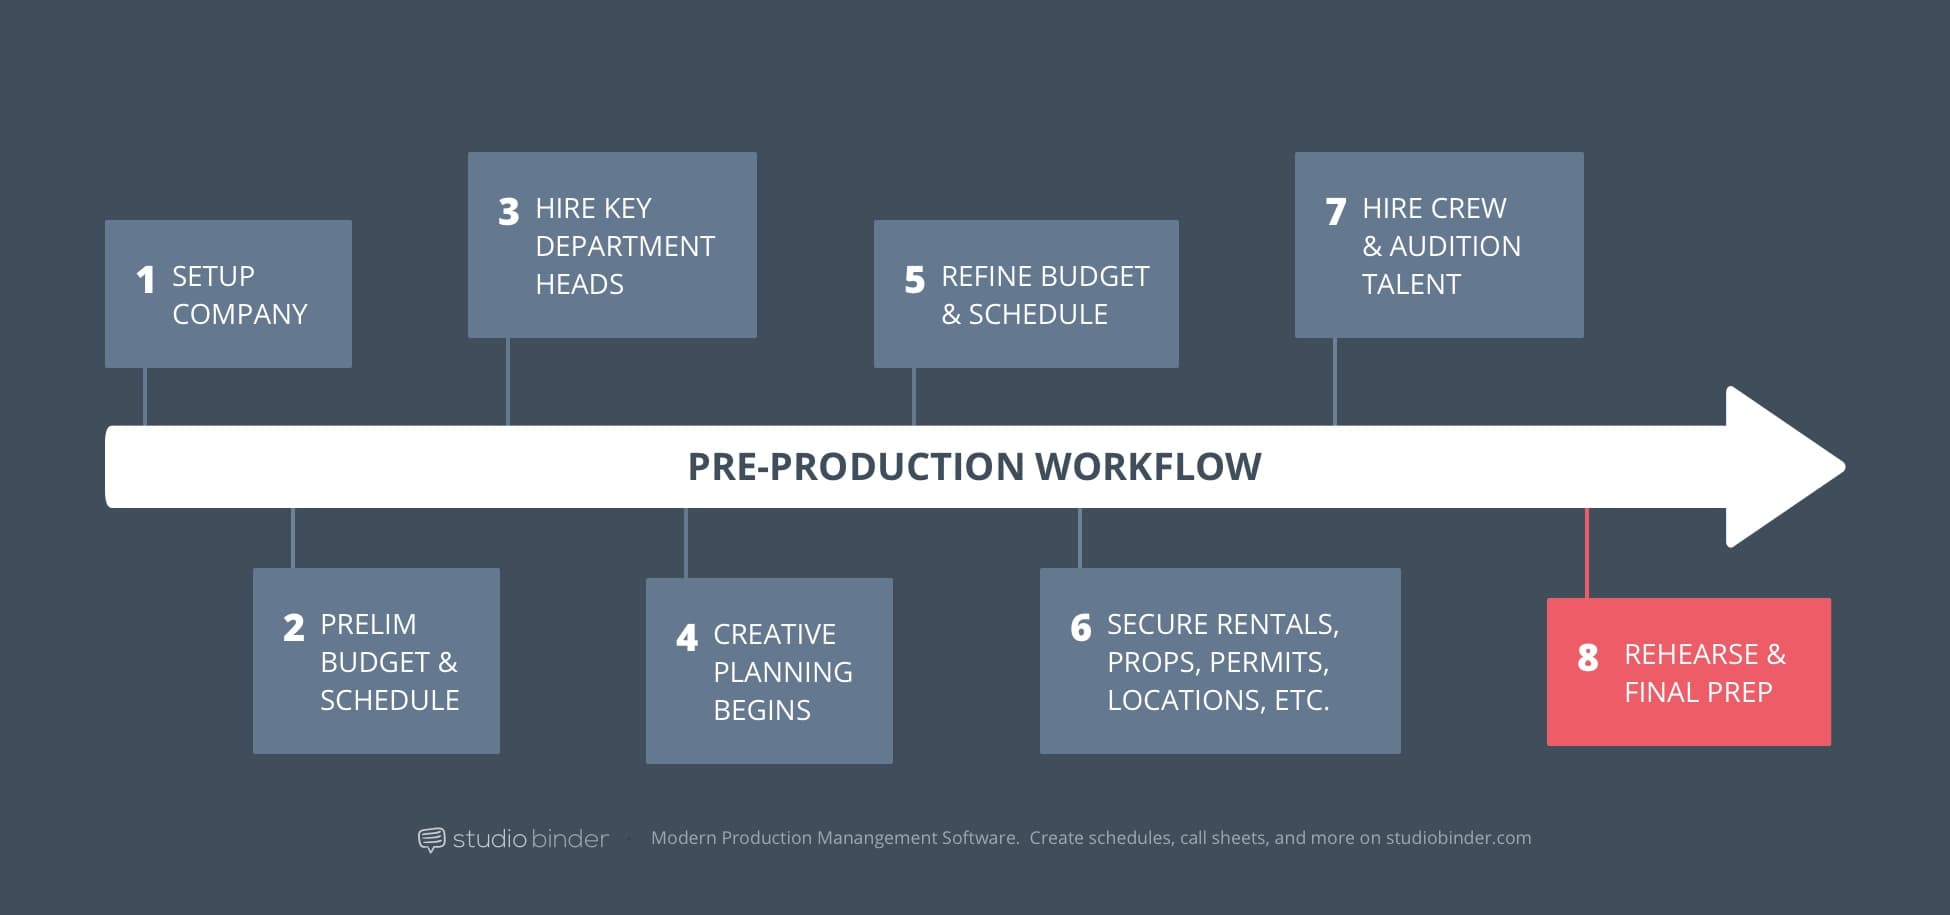 8 - StudioBinder Pre-Production Workflow - Rehearse and Final Prep